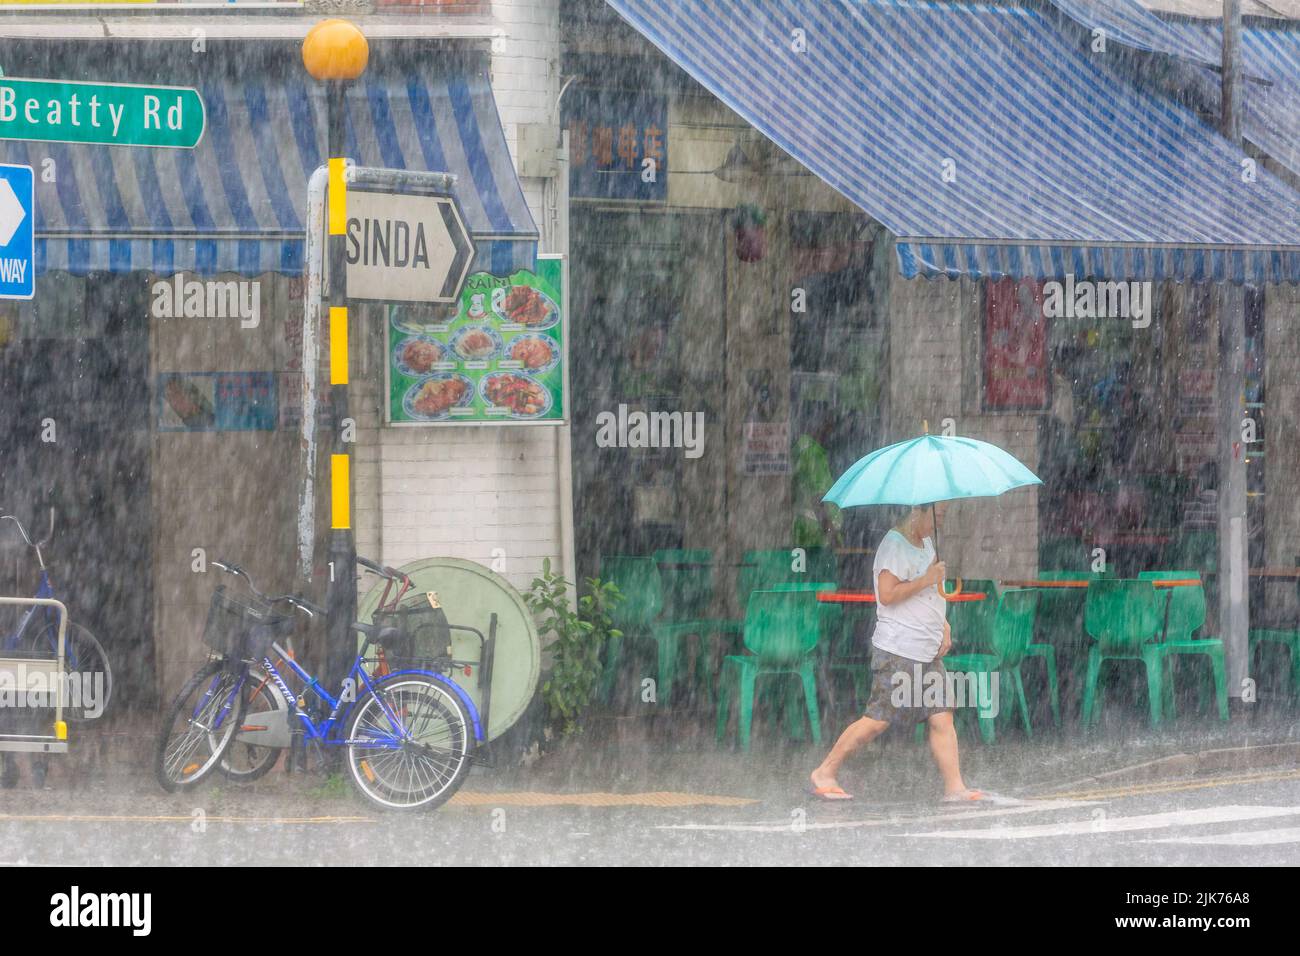 Corner of Serangoon Road and Beatty Road during tropical downpour, Republic of Singapore Stock Photo